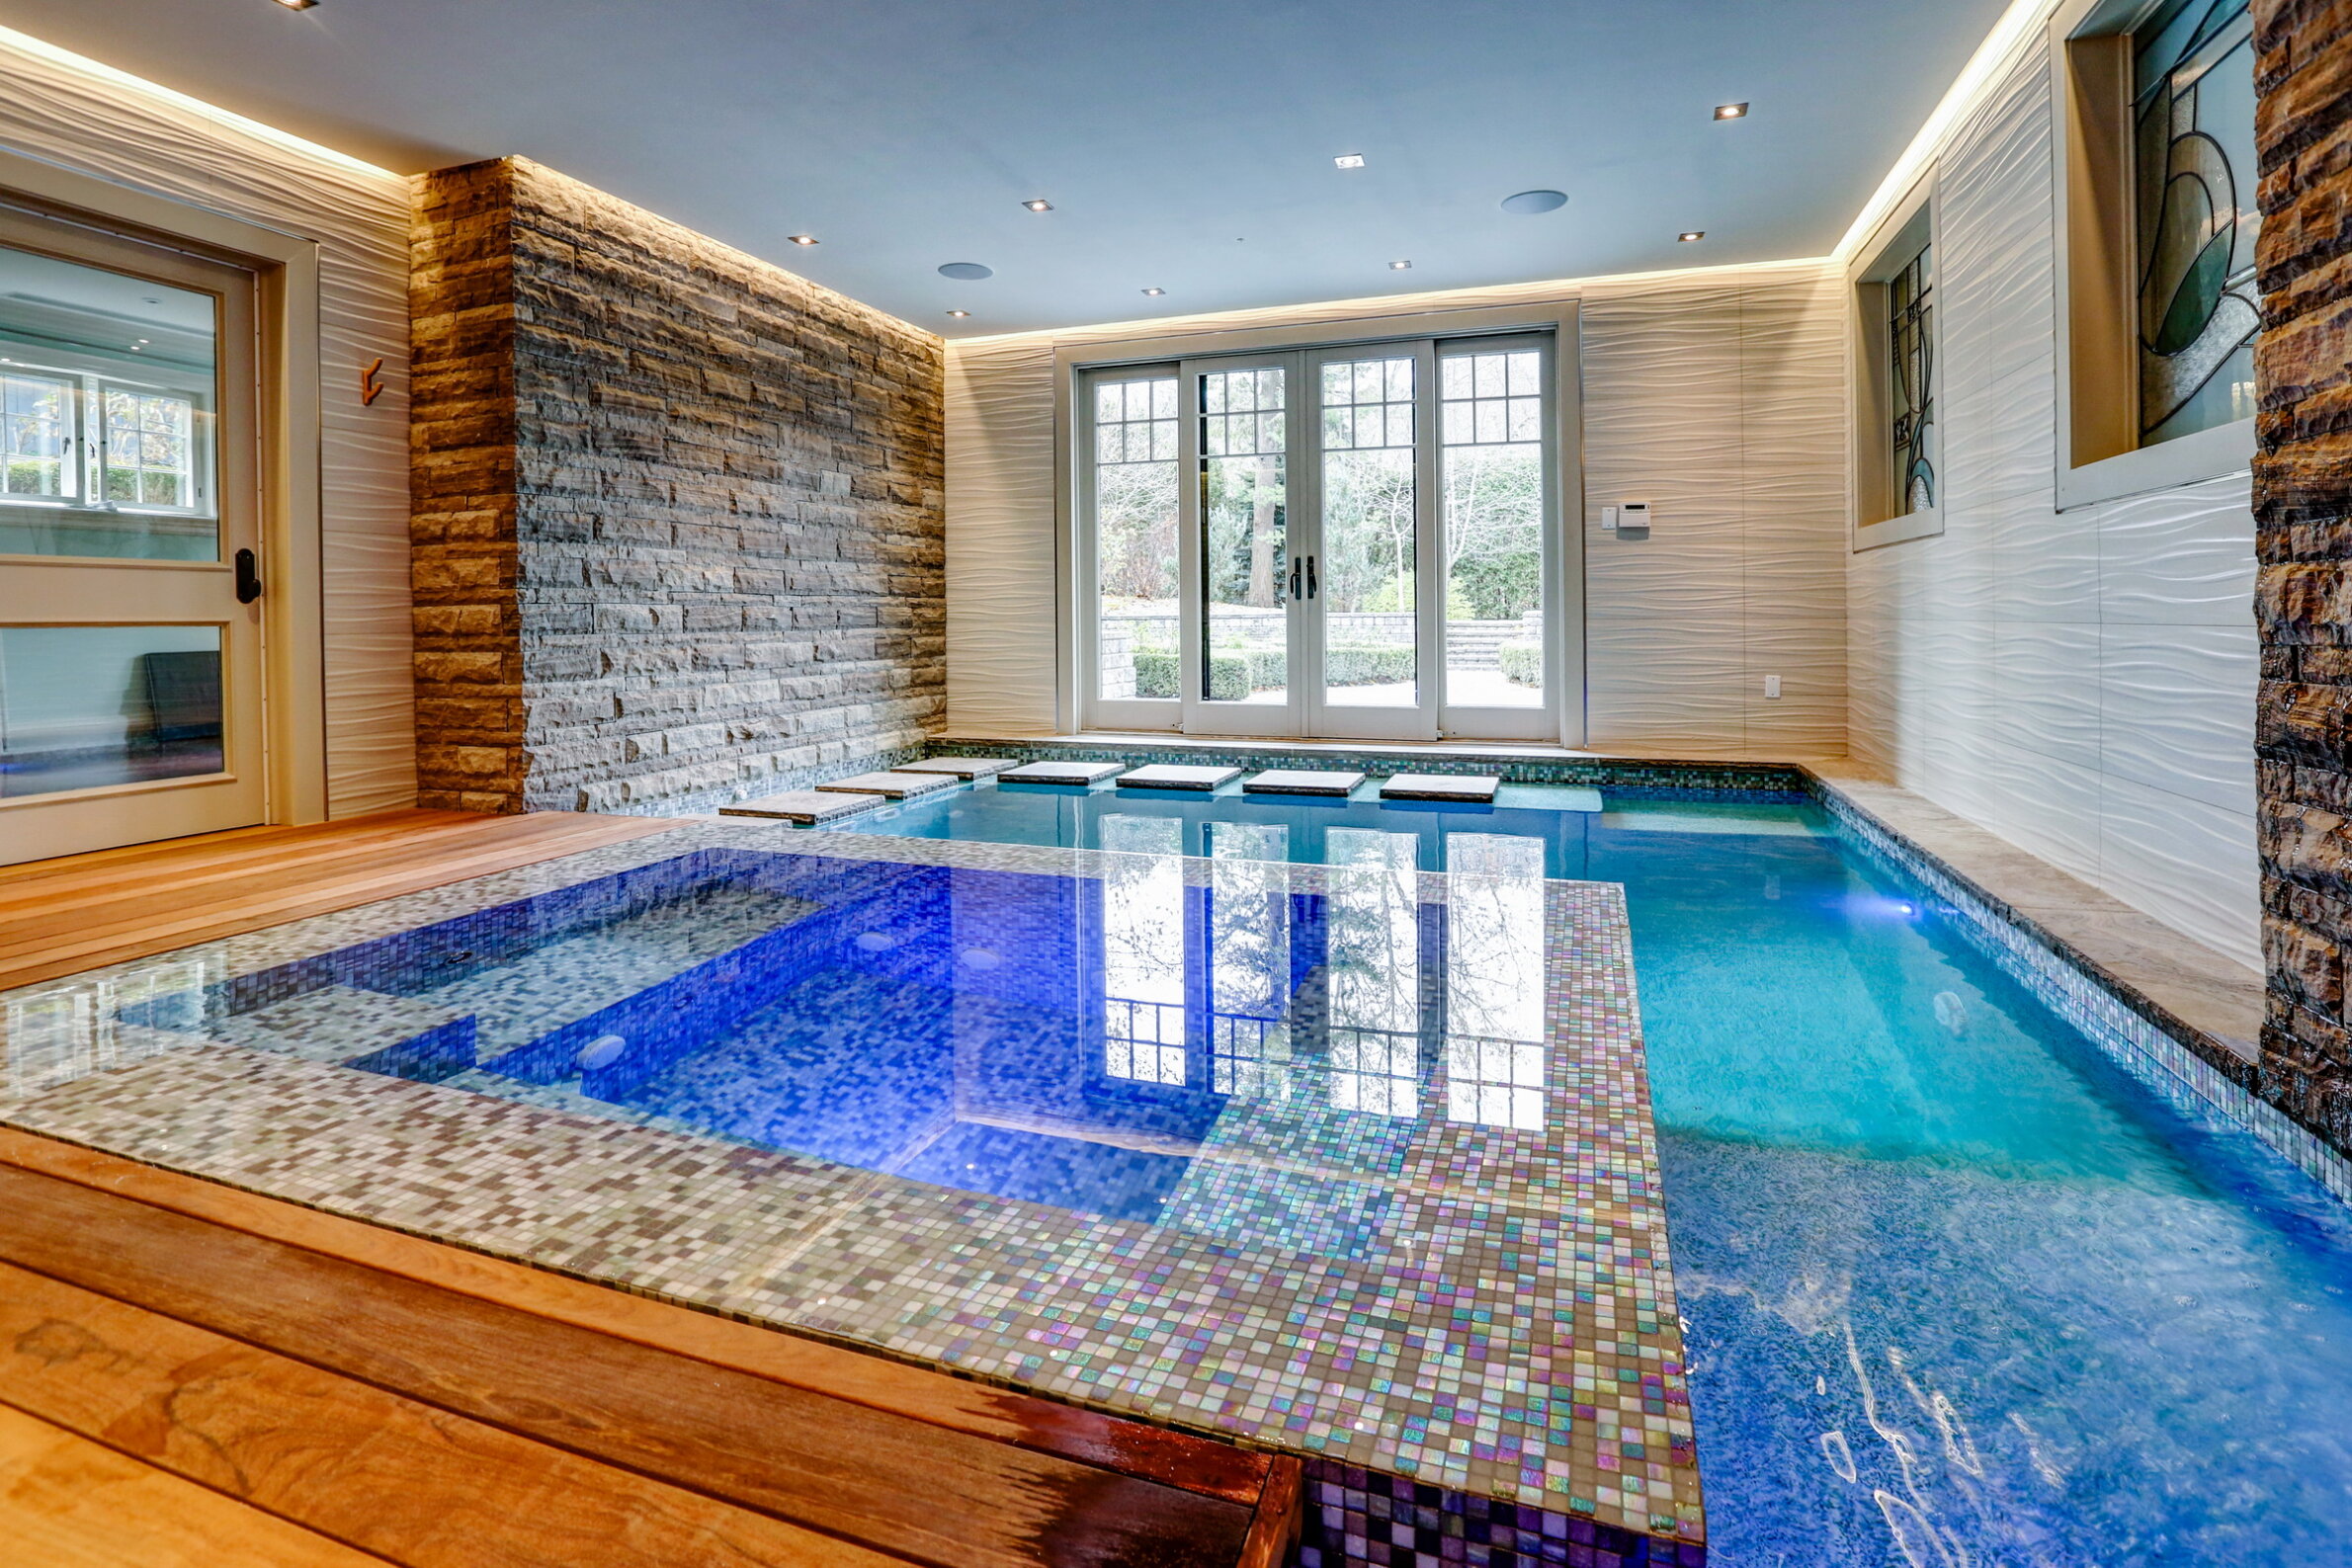 Indoor swimming pool with blue mosaic tiles, wooden deck, natural light through large windows, and a stone accent wall on one side.